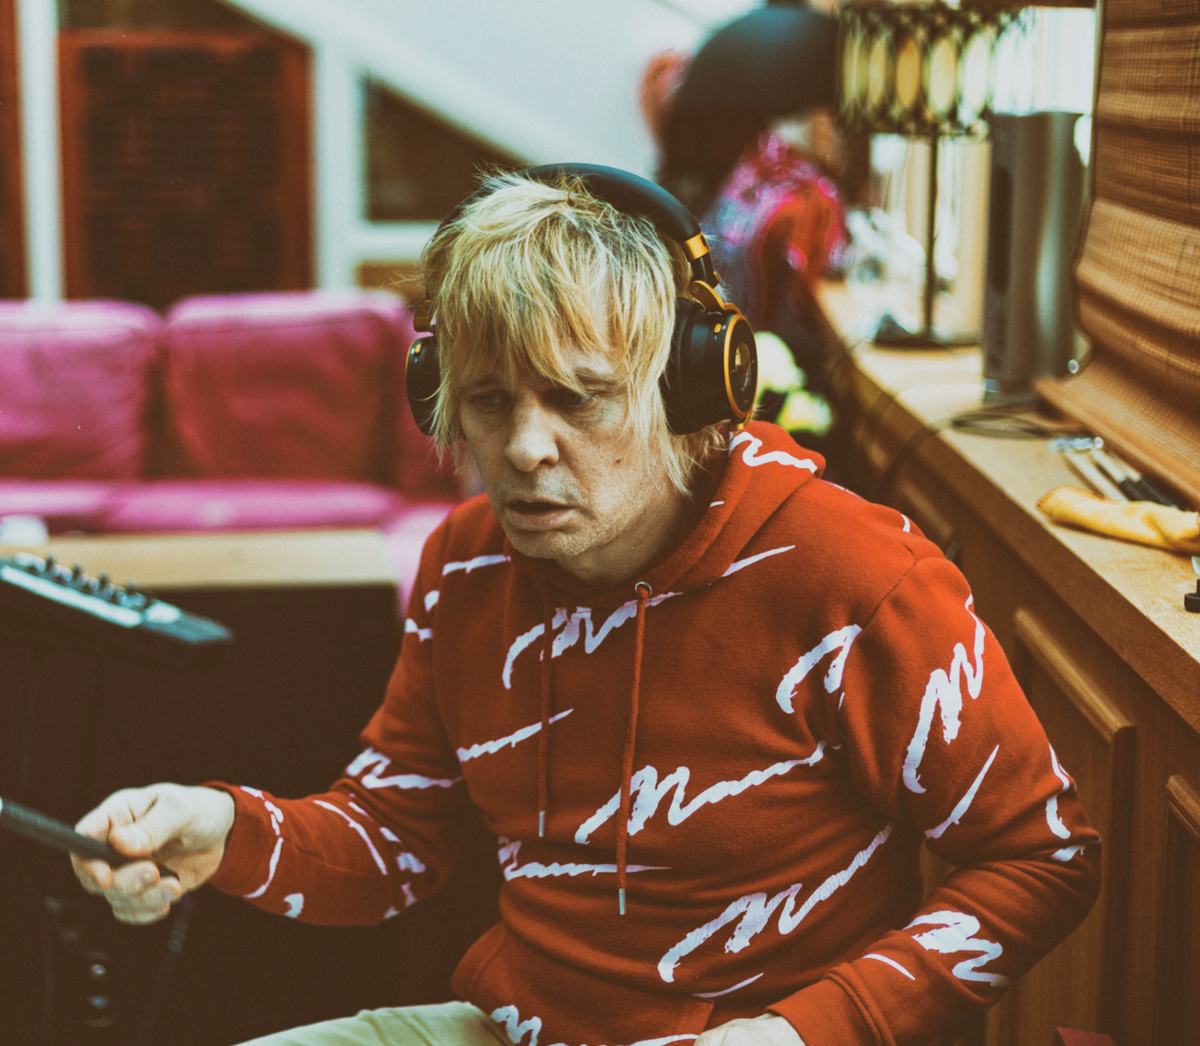 Zak Starkey wearing the Ashdown Meters OV1 b Jamaica soundsystem whilst playing the drums